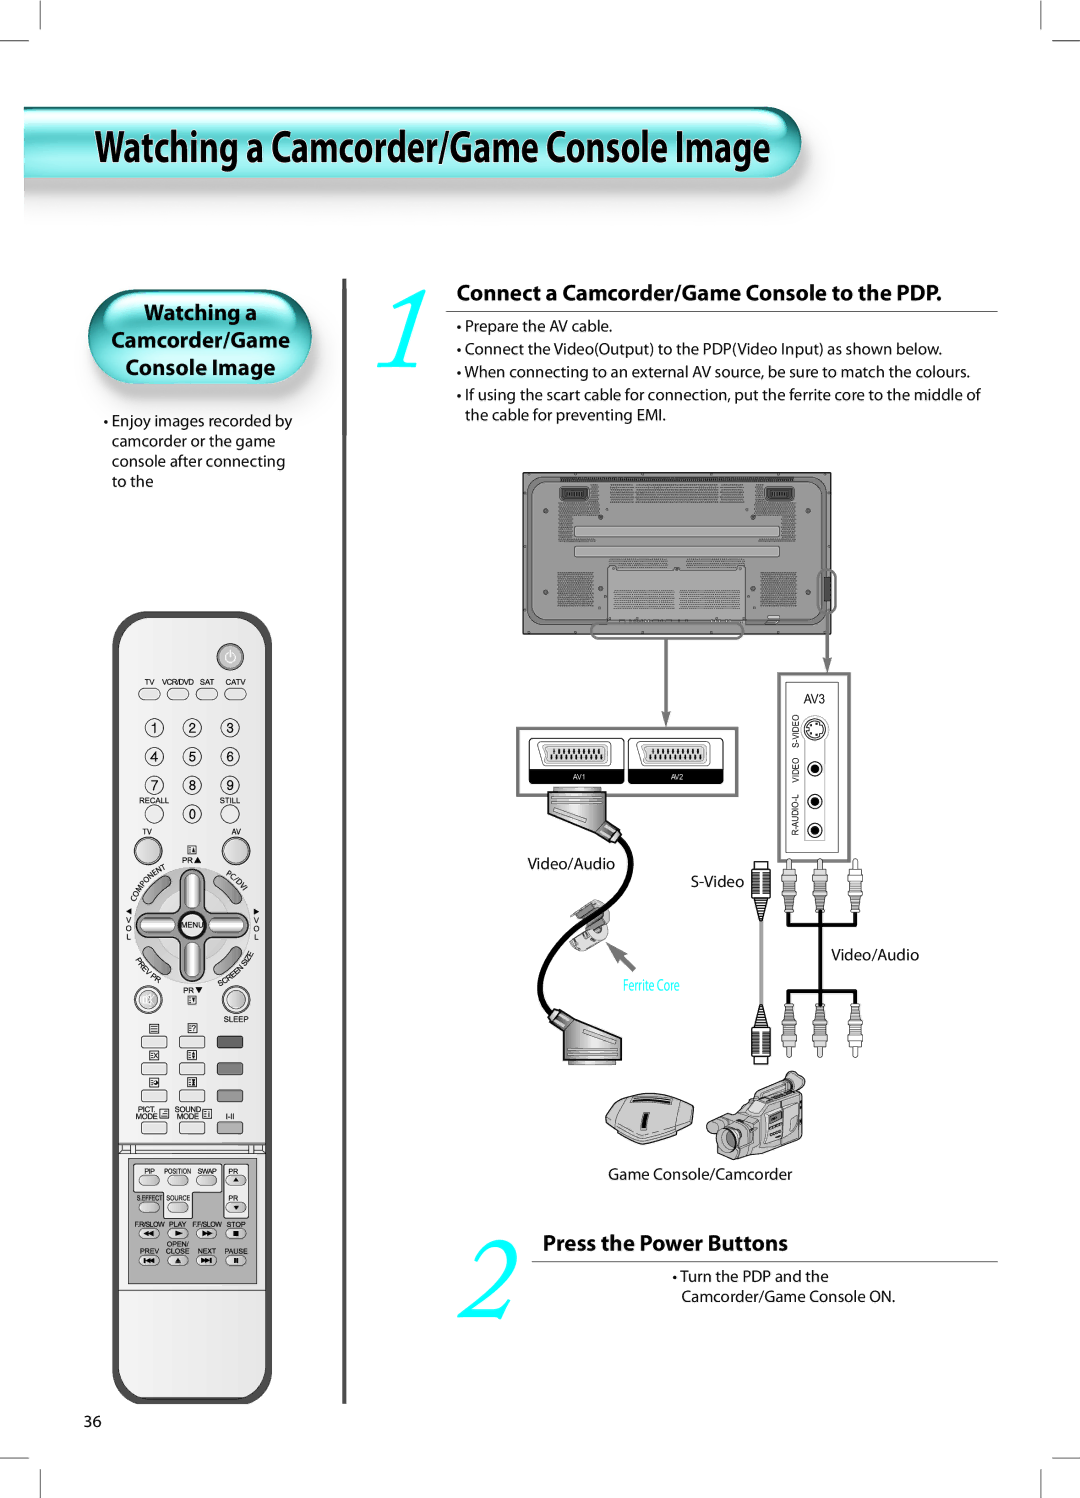 Daewoo DT-42A1 user manual Watching a Camcorder/Game Console Image, Connect a Camcorder/Game Console to the PDP 